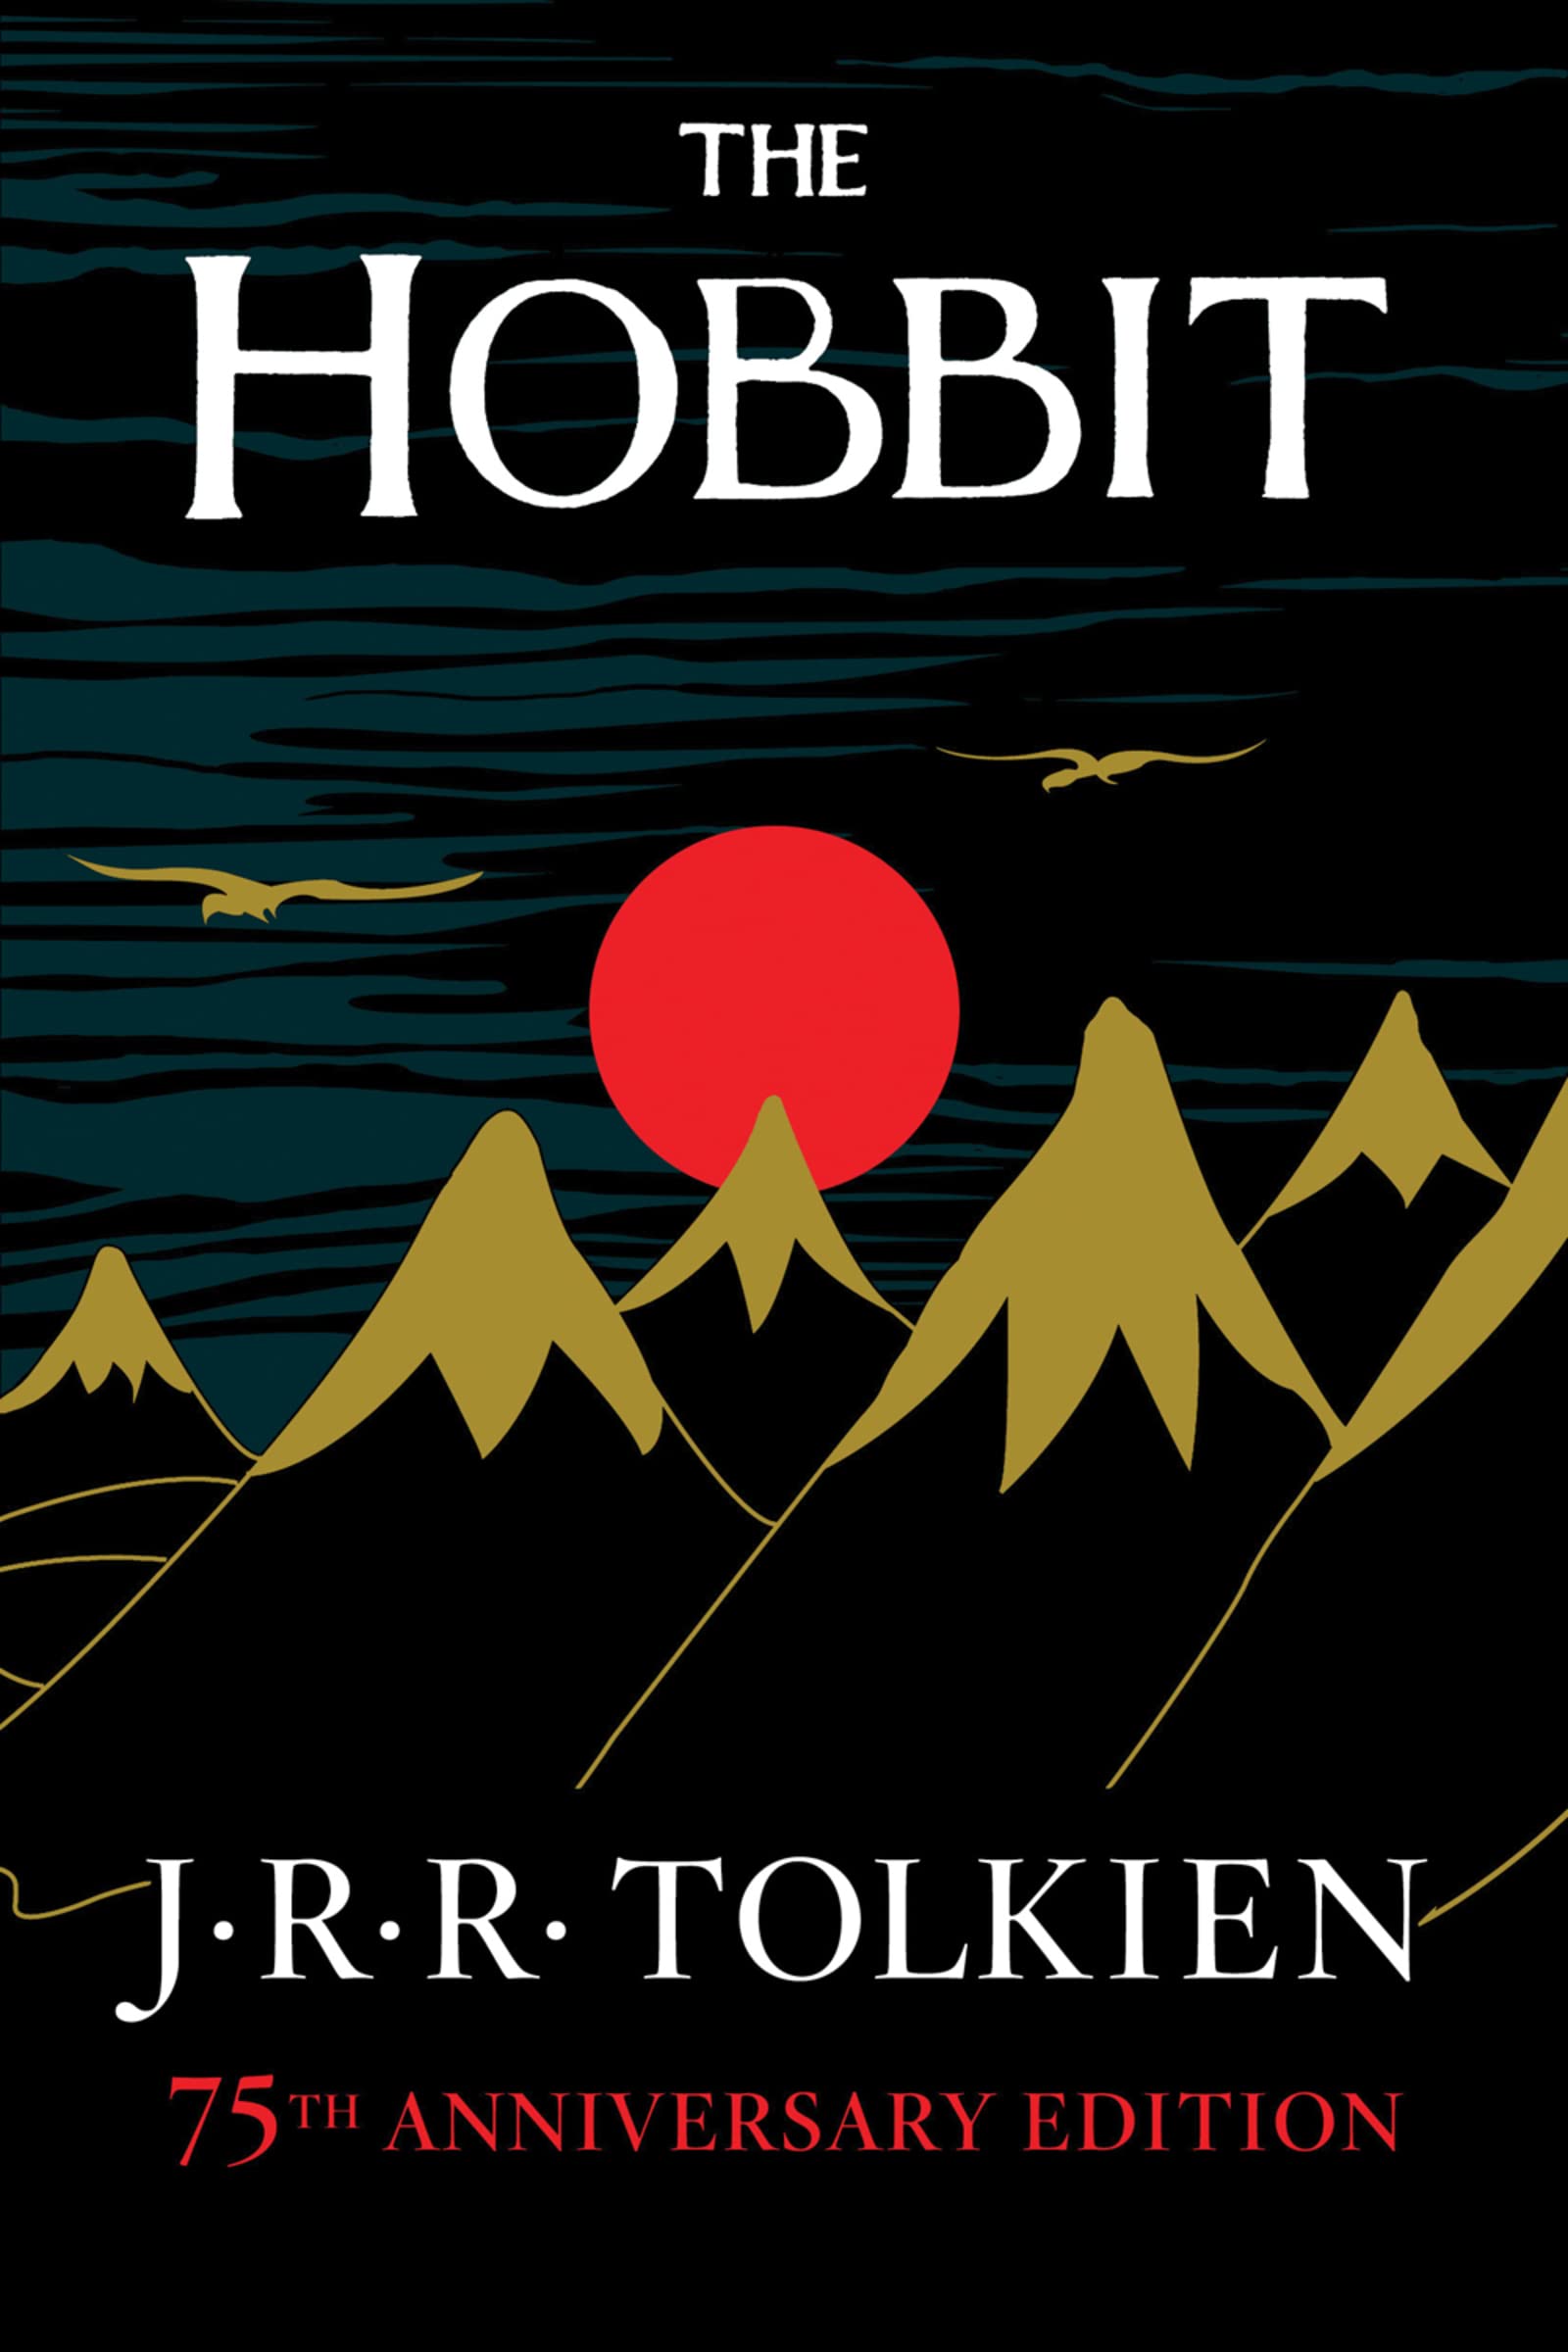 the hobbit book covers 75th anniversary edition 2012